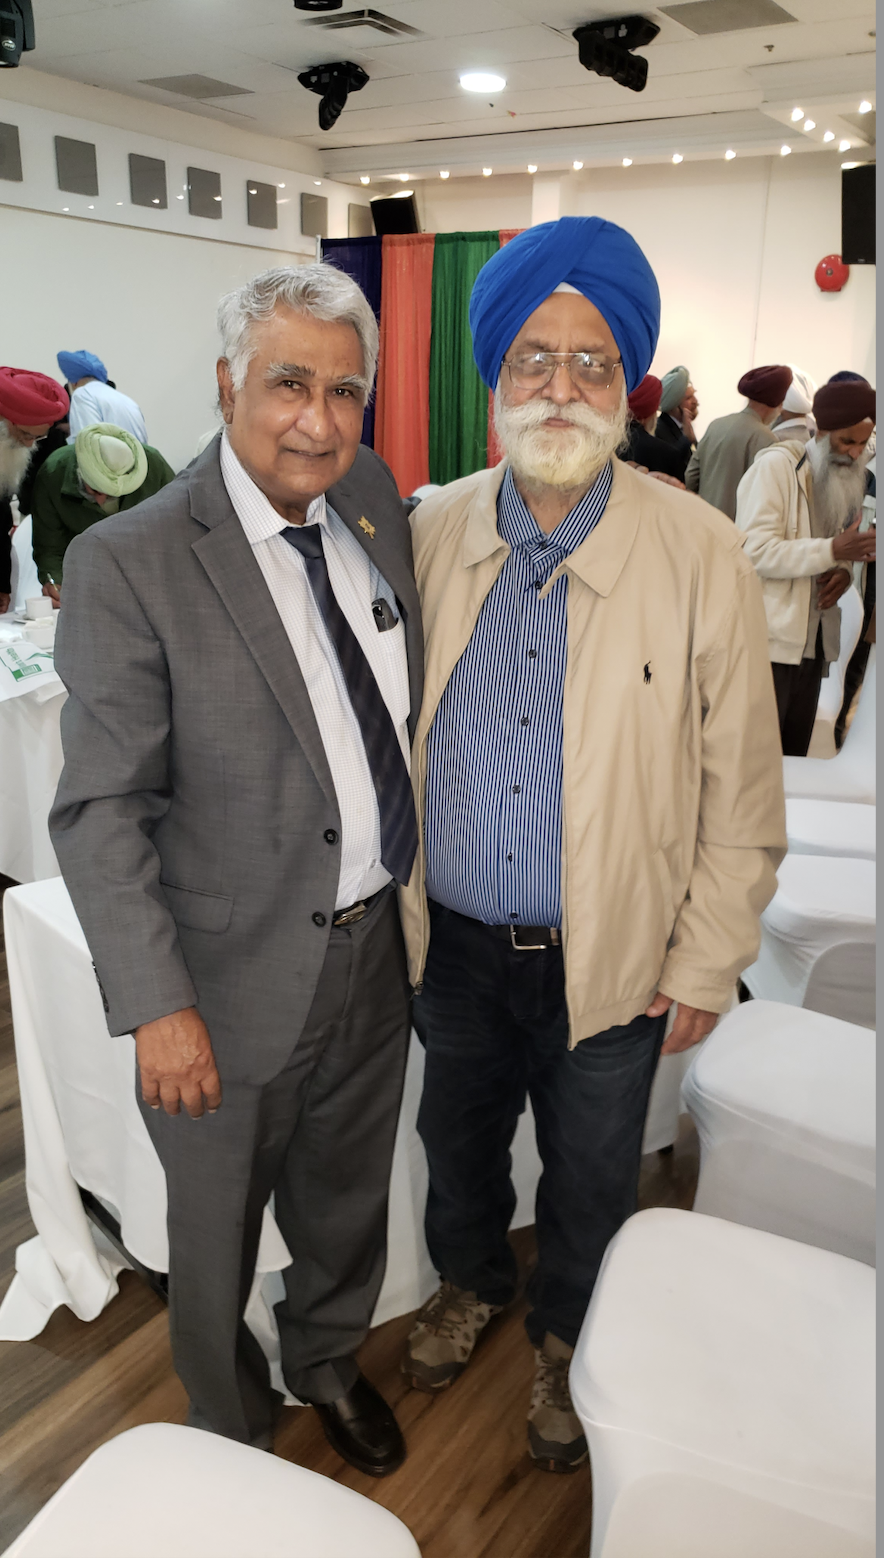 Renowned Scholar Dr. Balwant Singh Dhillon Releases Two Books During Surrey Visit